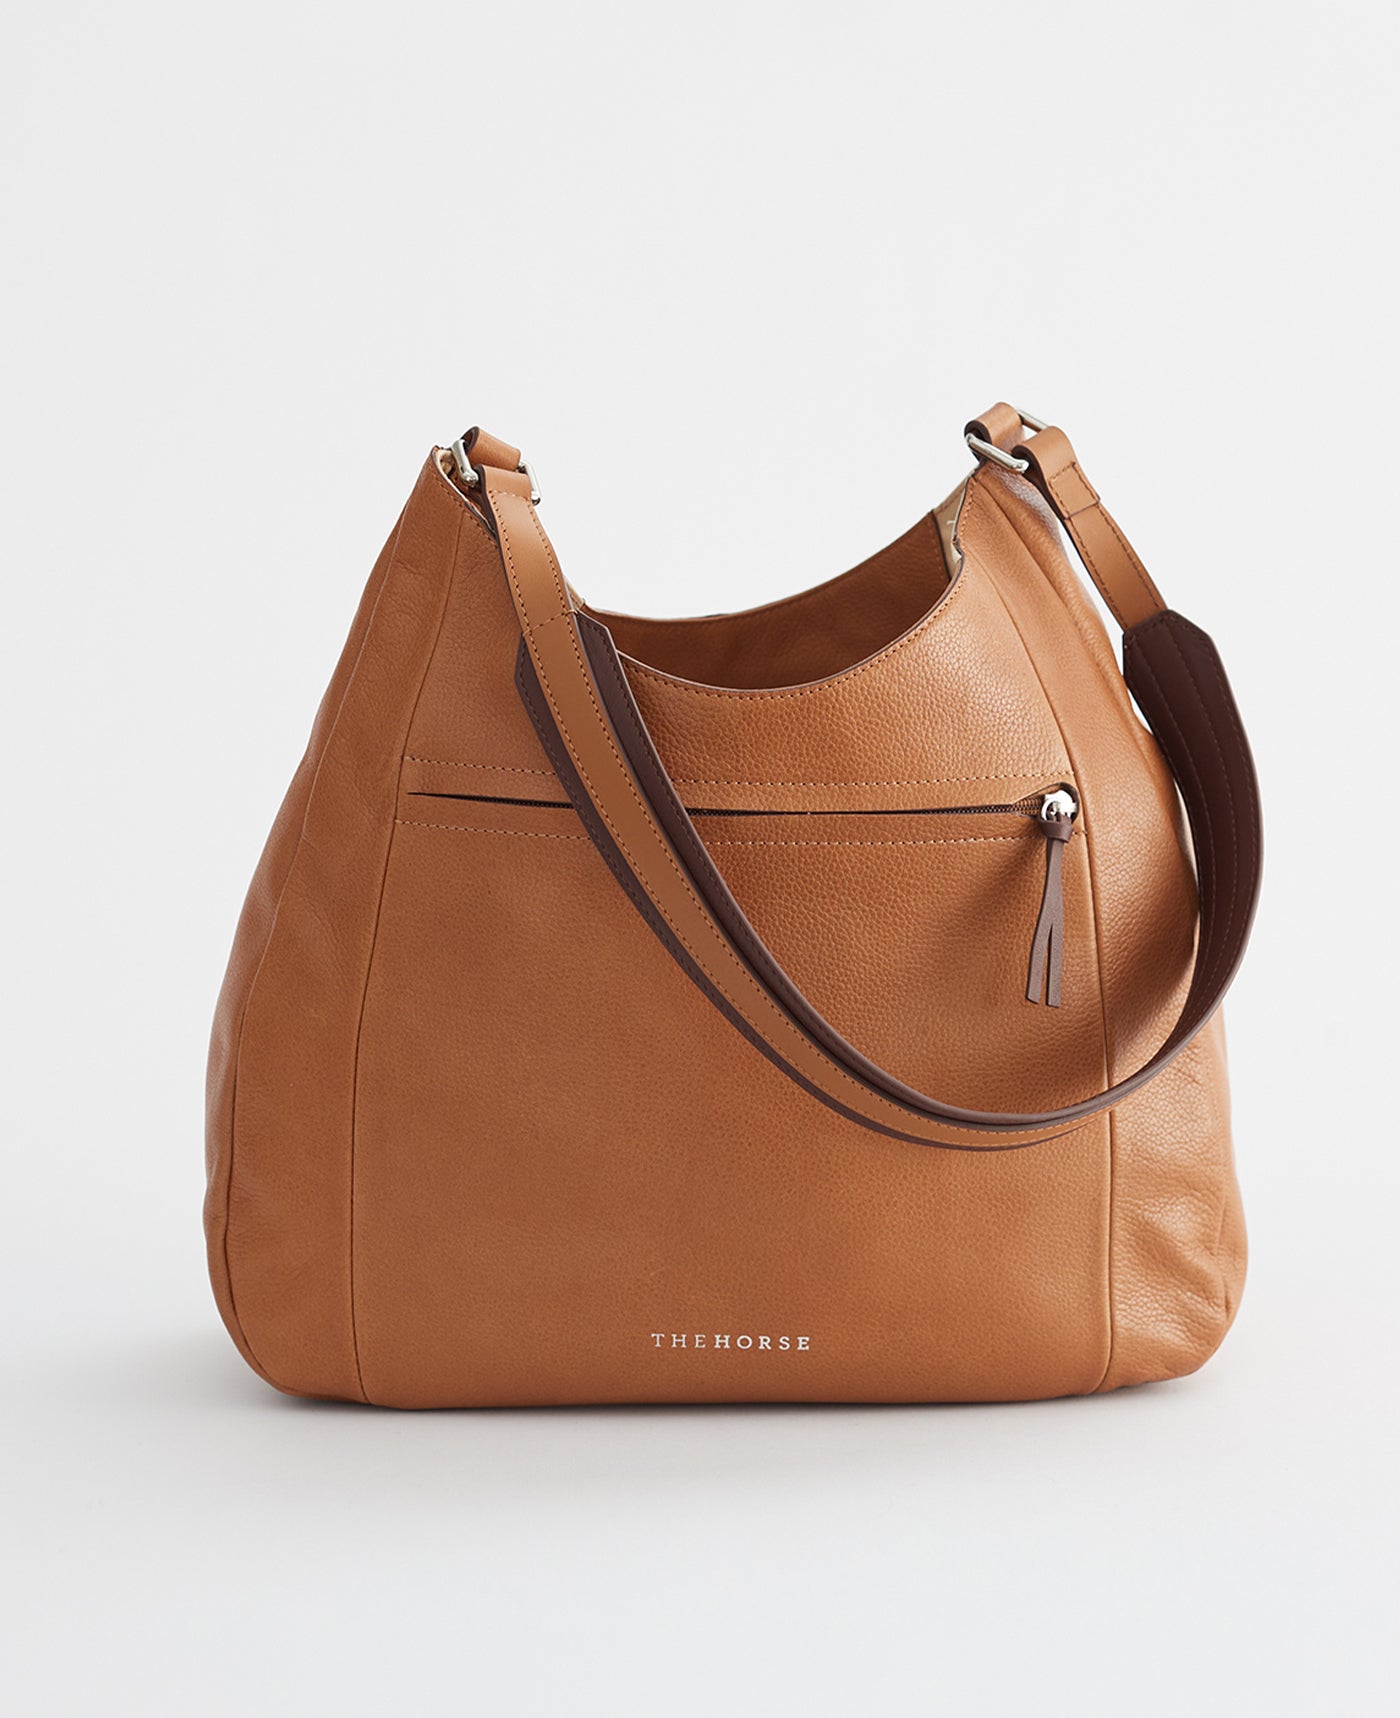 The August Handbag: Caramel Leather Hobo Bag by The Horse®